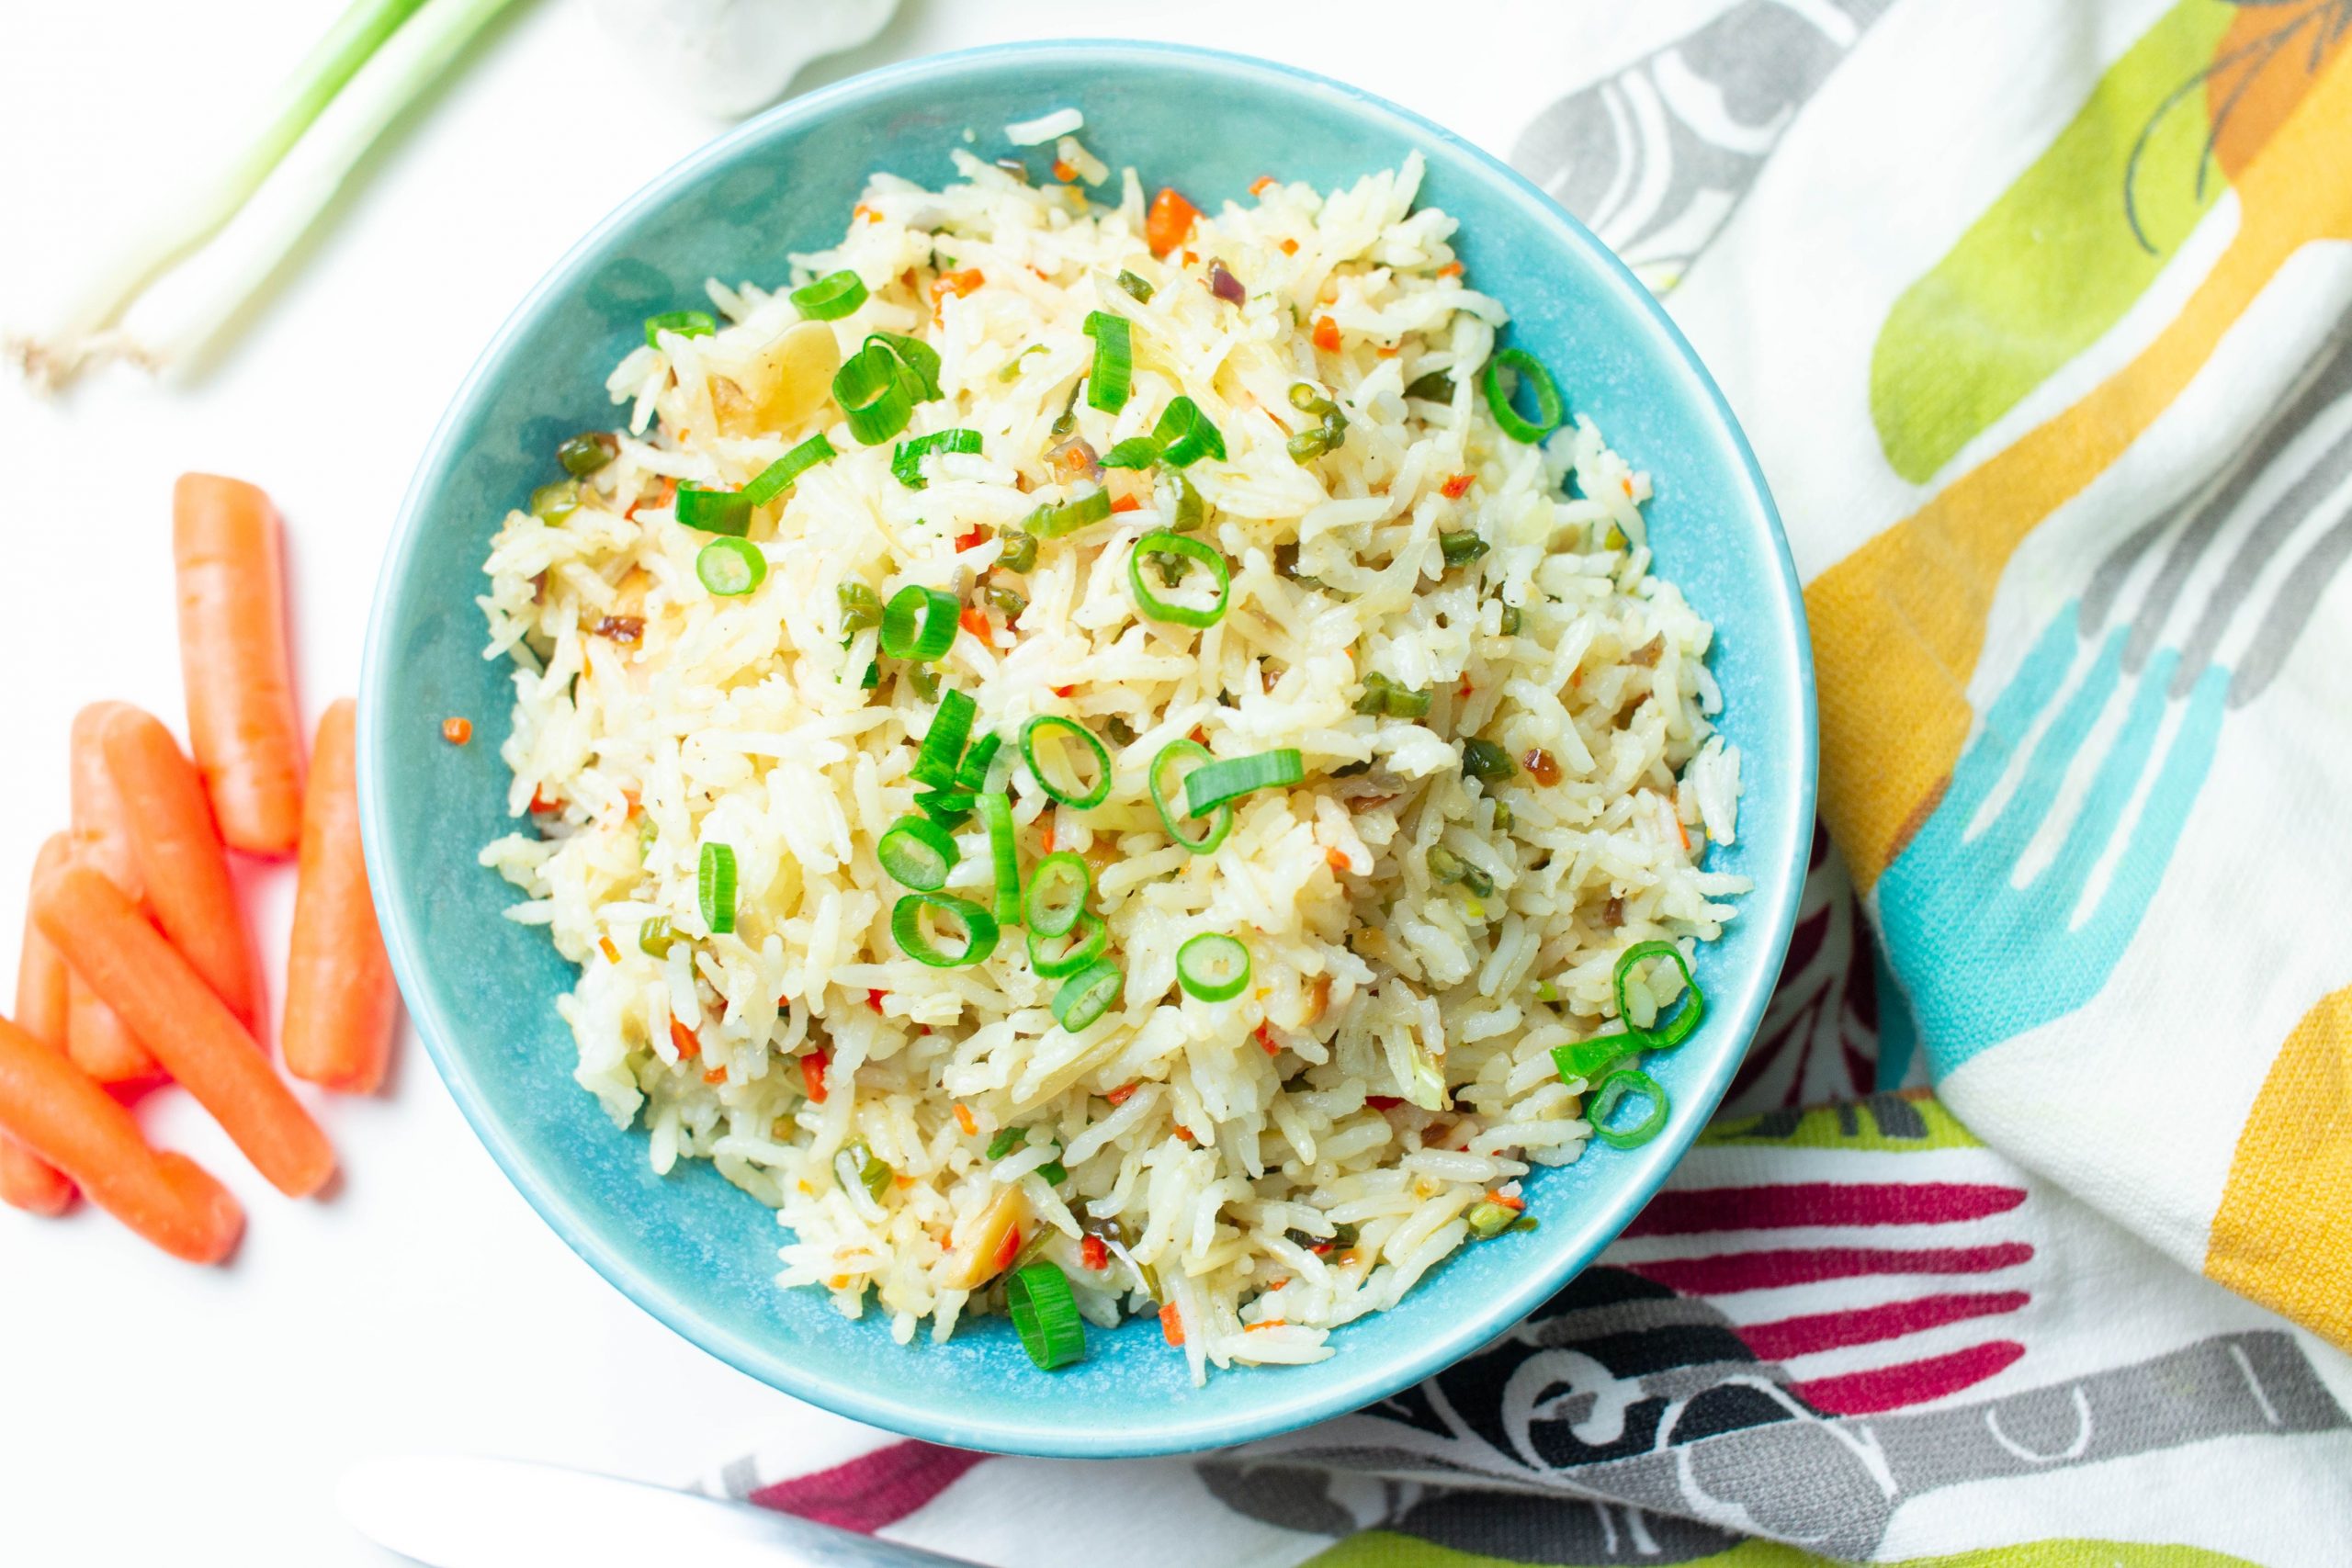 5 tasty meals that can be made using leftover rice